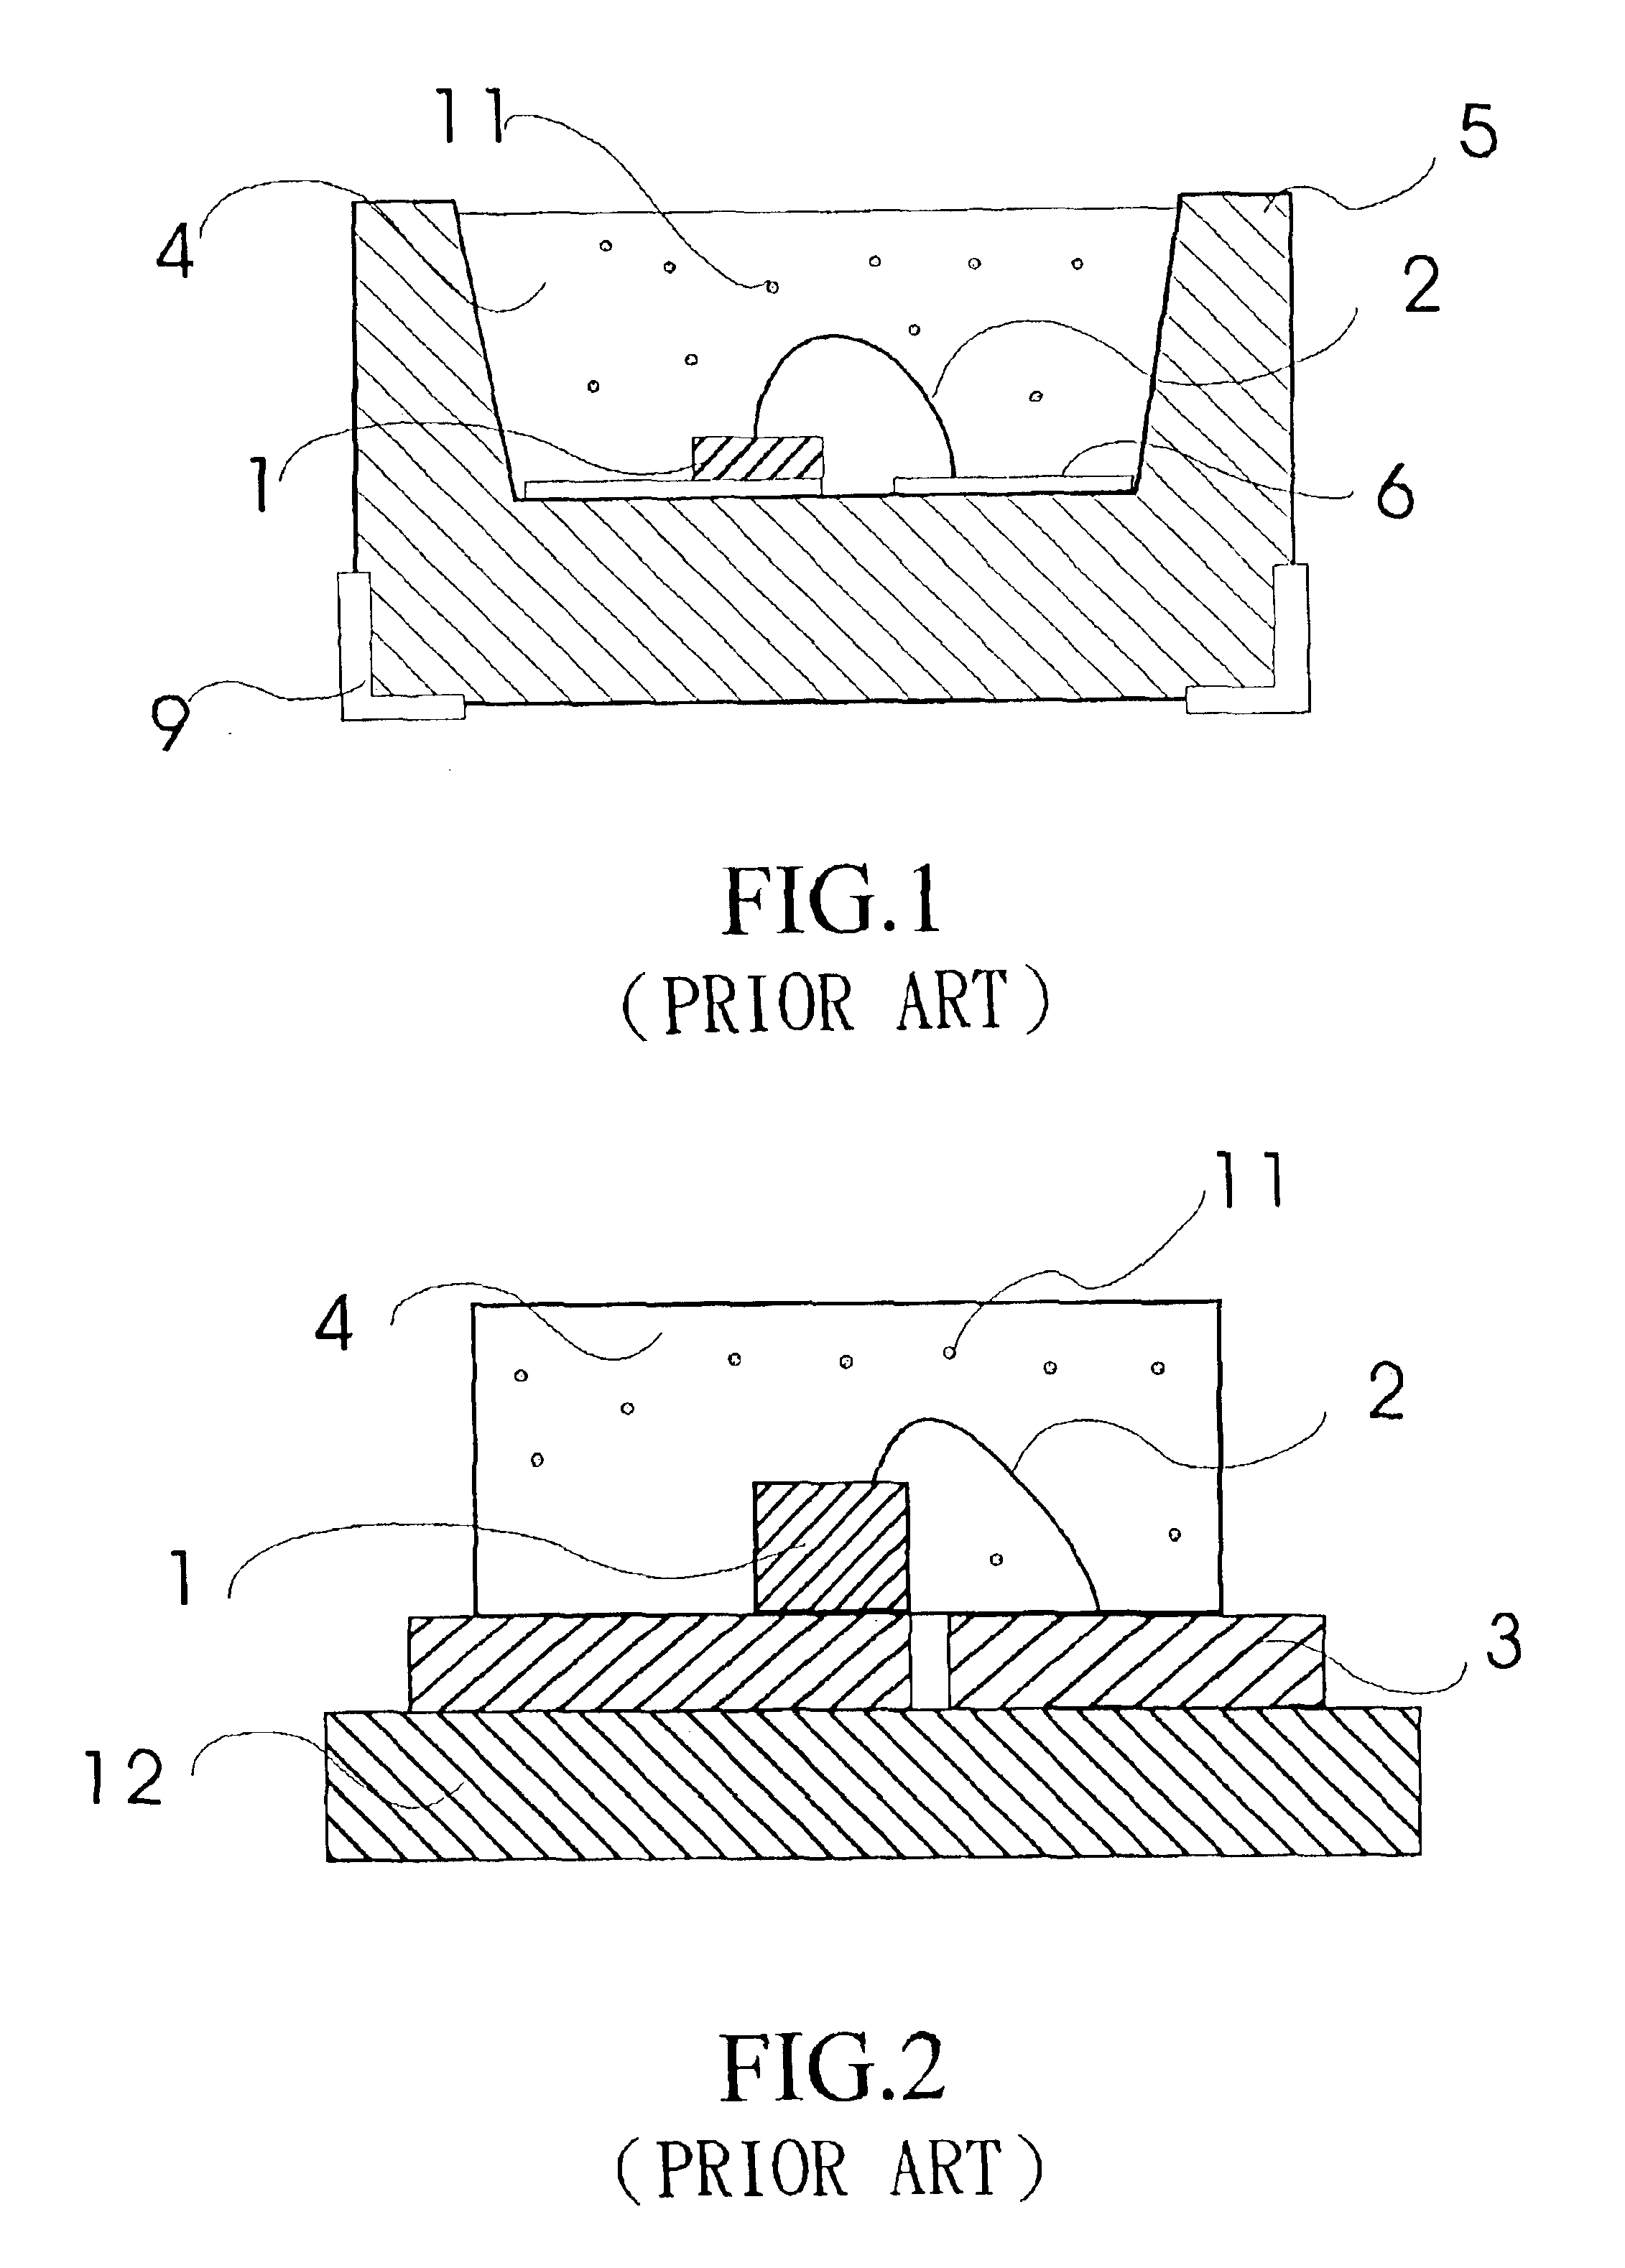 Package structure of a composite LED